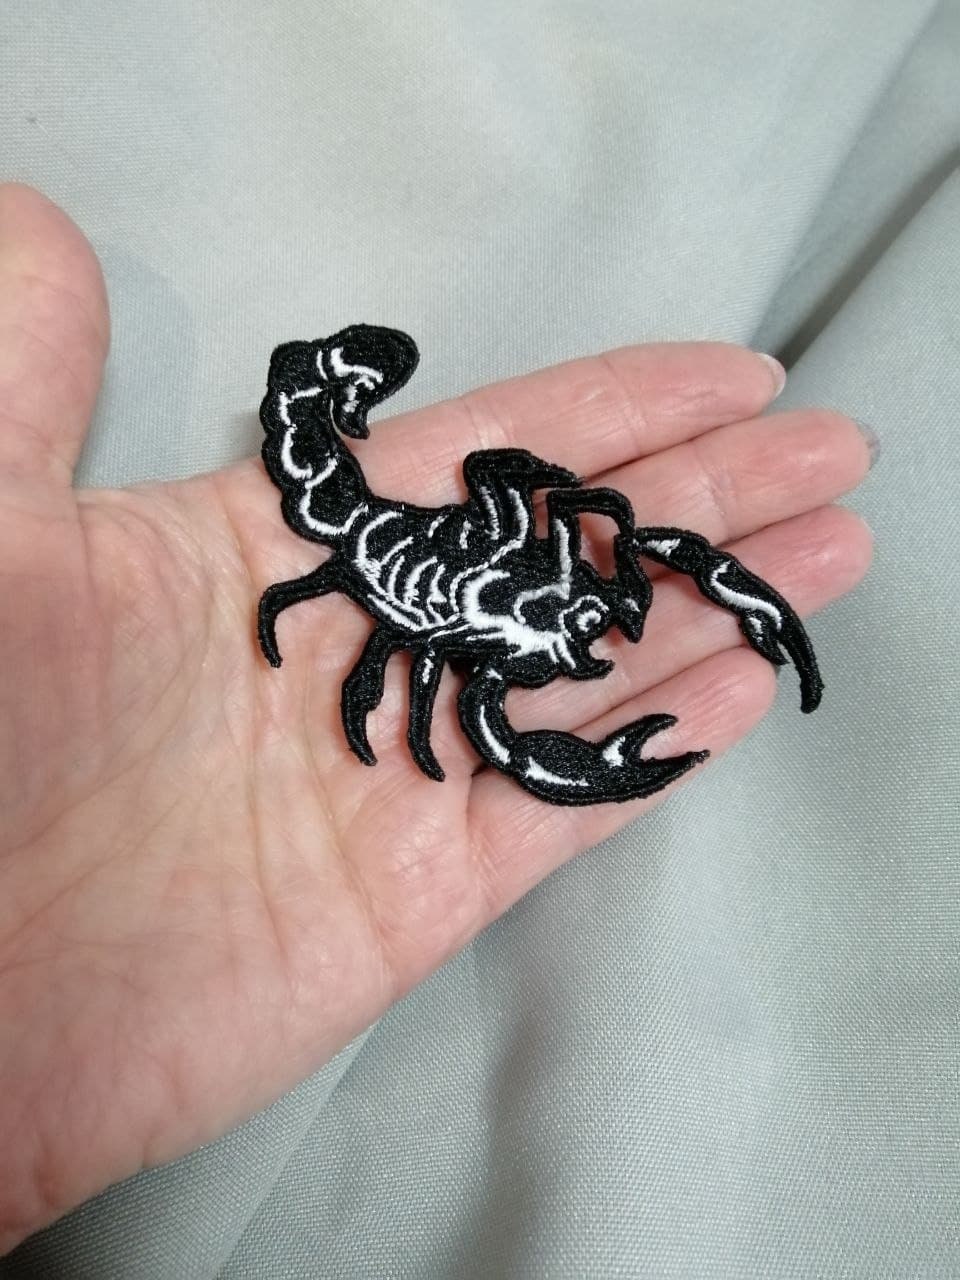 Scorpion Large Size Iron on Embroidered Big Back Patch XL